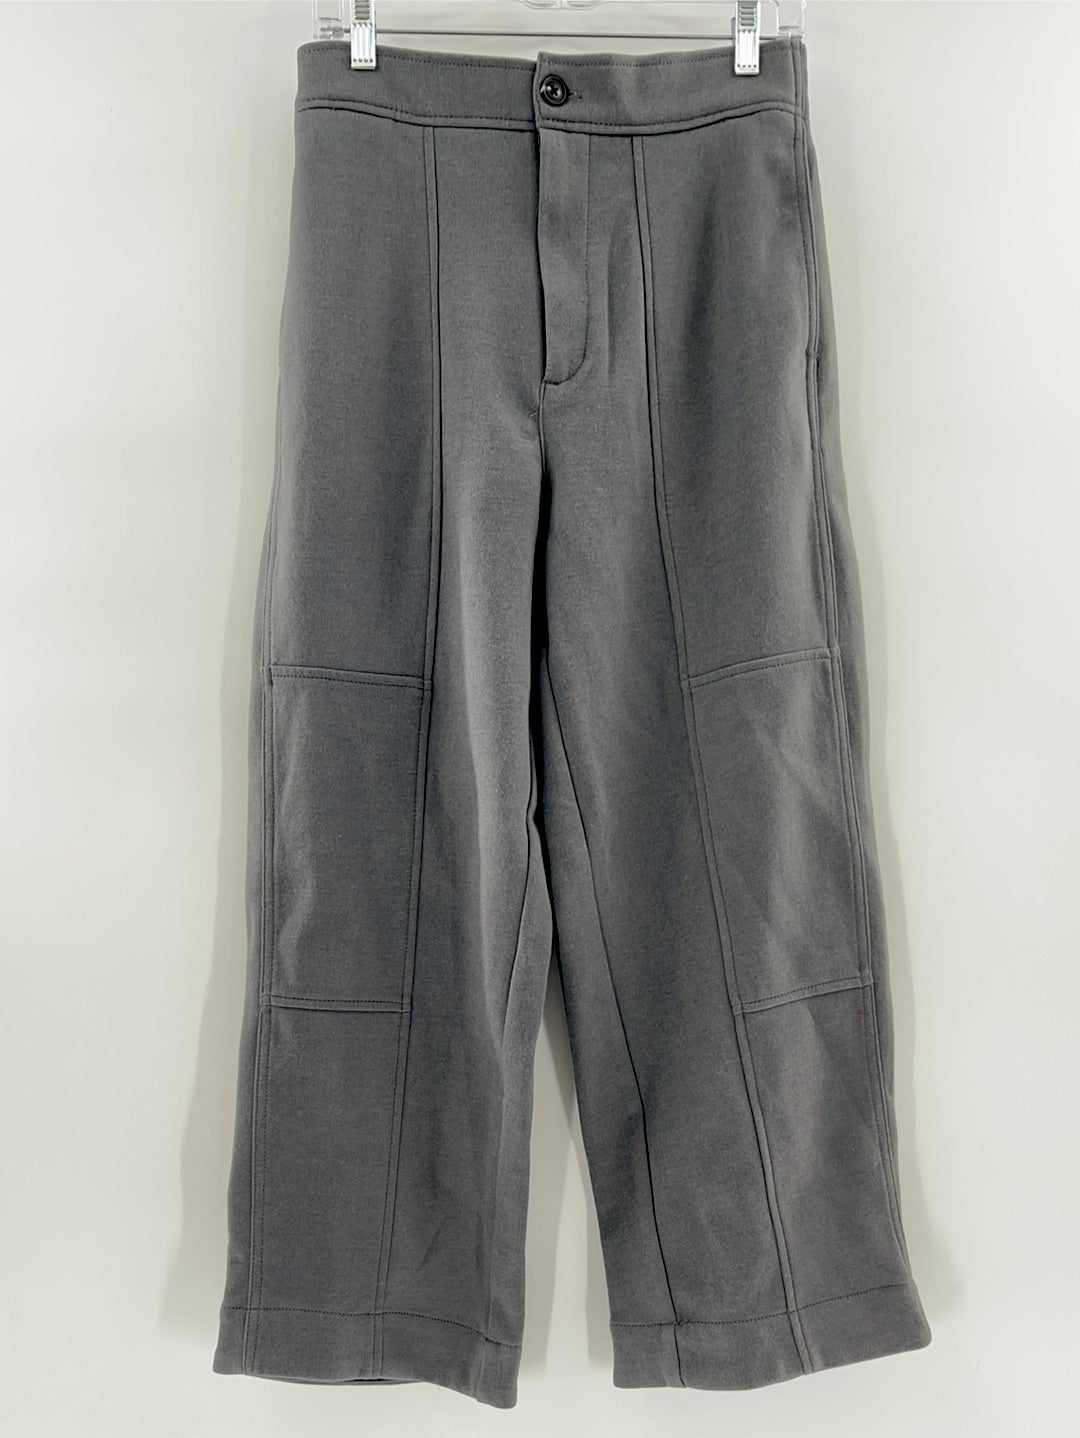 Urban Outfitters Gray Sweatpants Trousers (Size M)